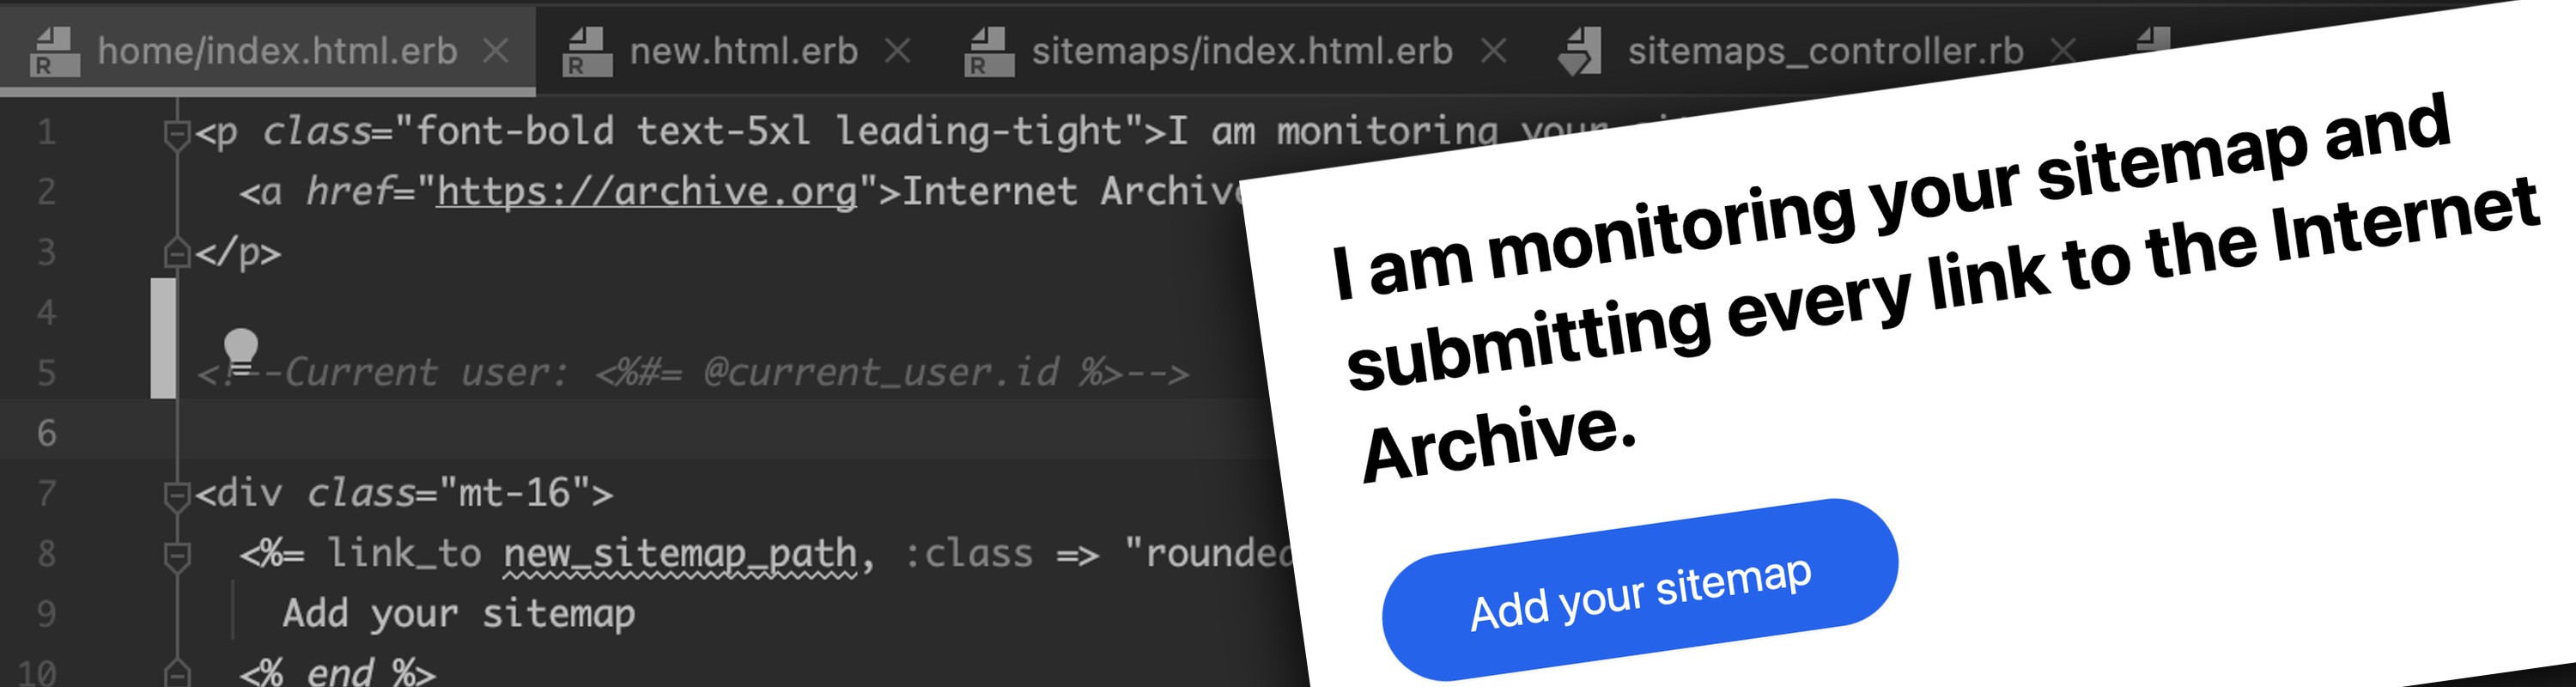 WIP: Building a sitemap to internet archive tool